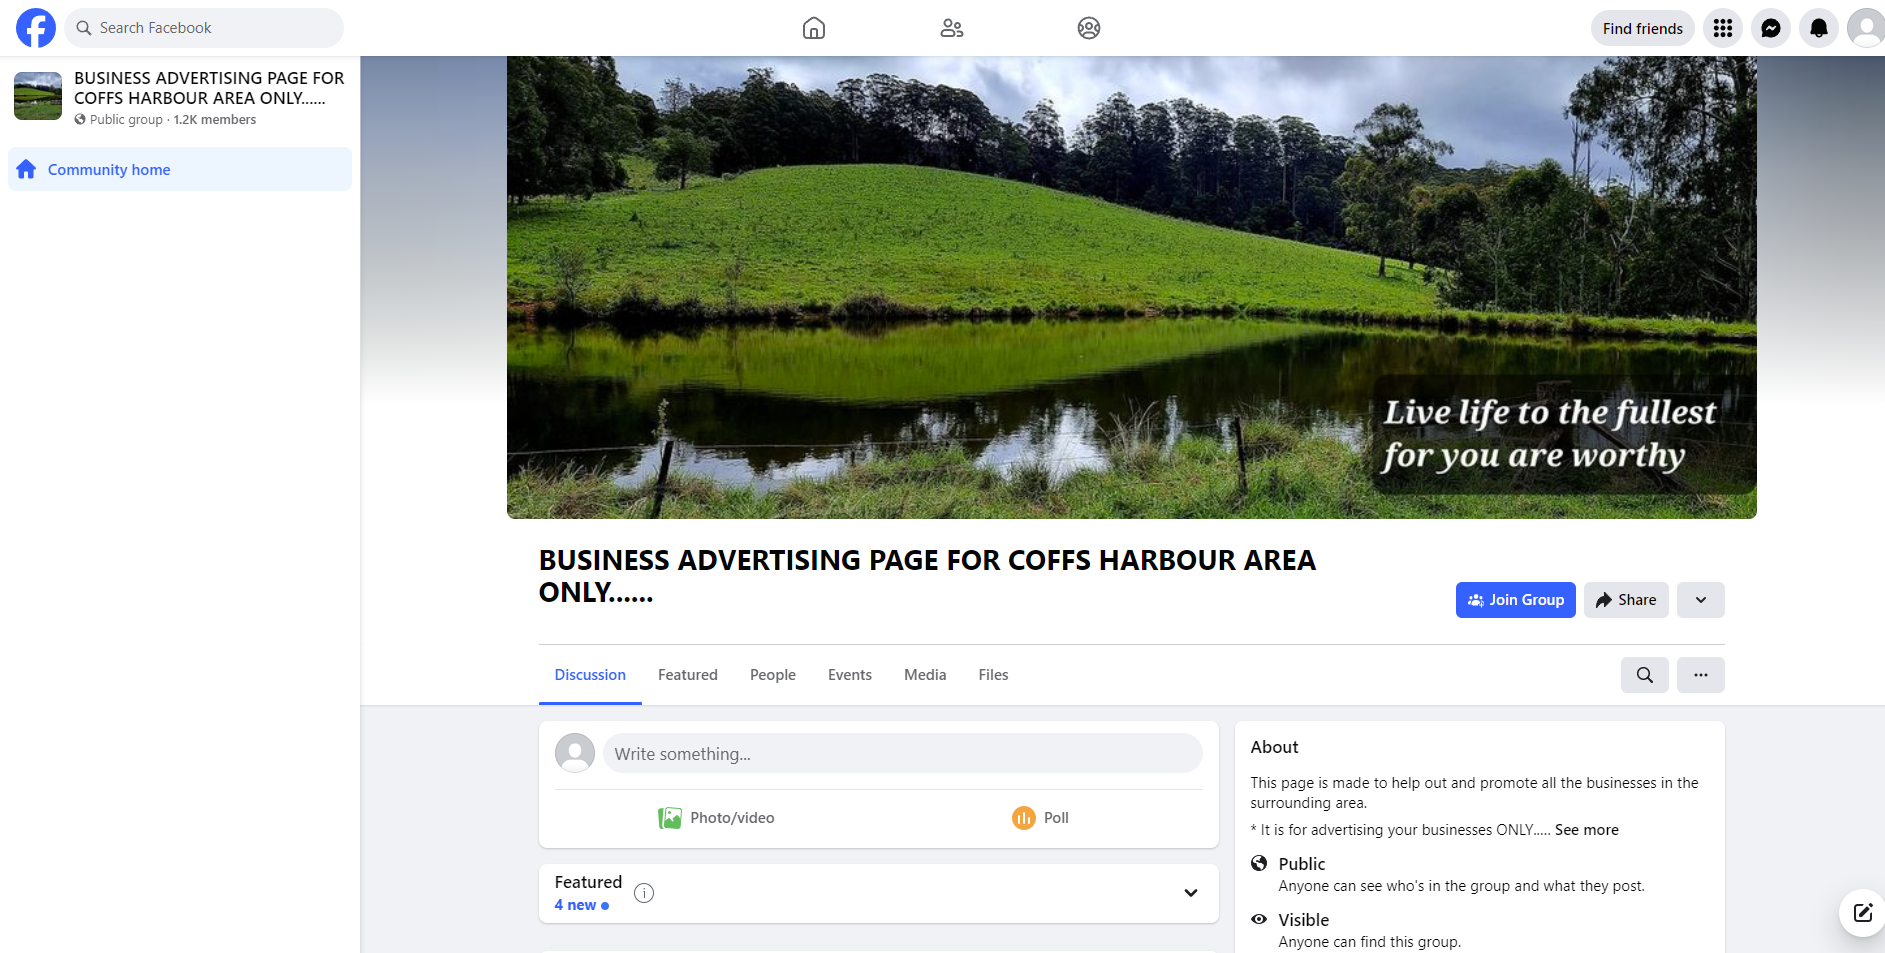 Coffs Harbour Business Advertising Page